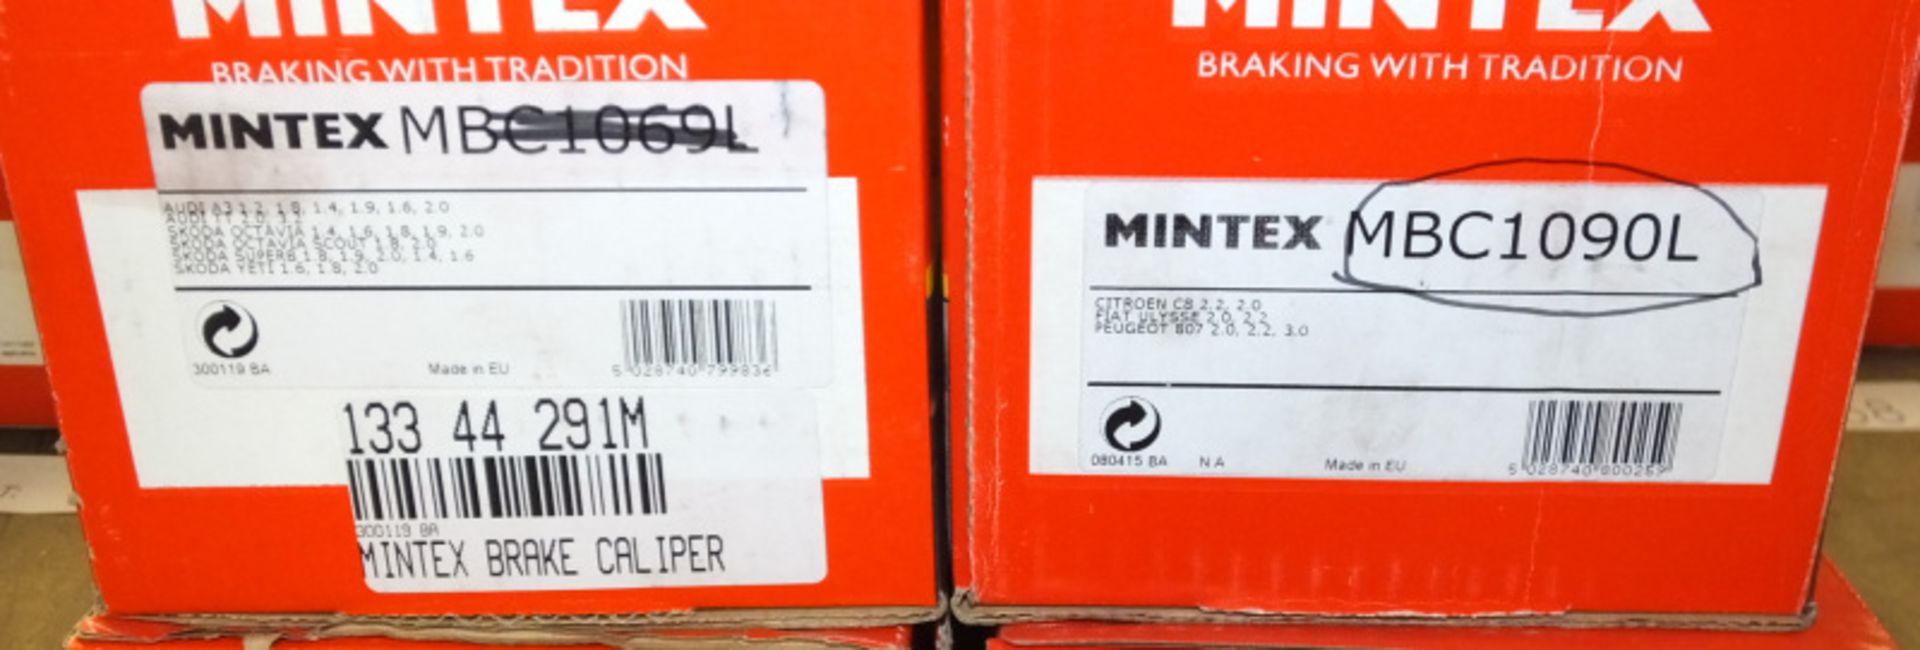 Mintex Brake Calipers - Please see pictures for examples of part numbers. - Image 2 of 3